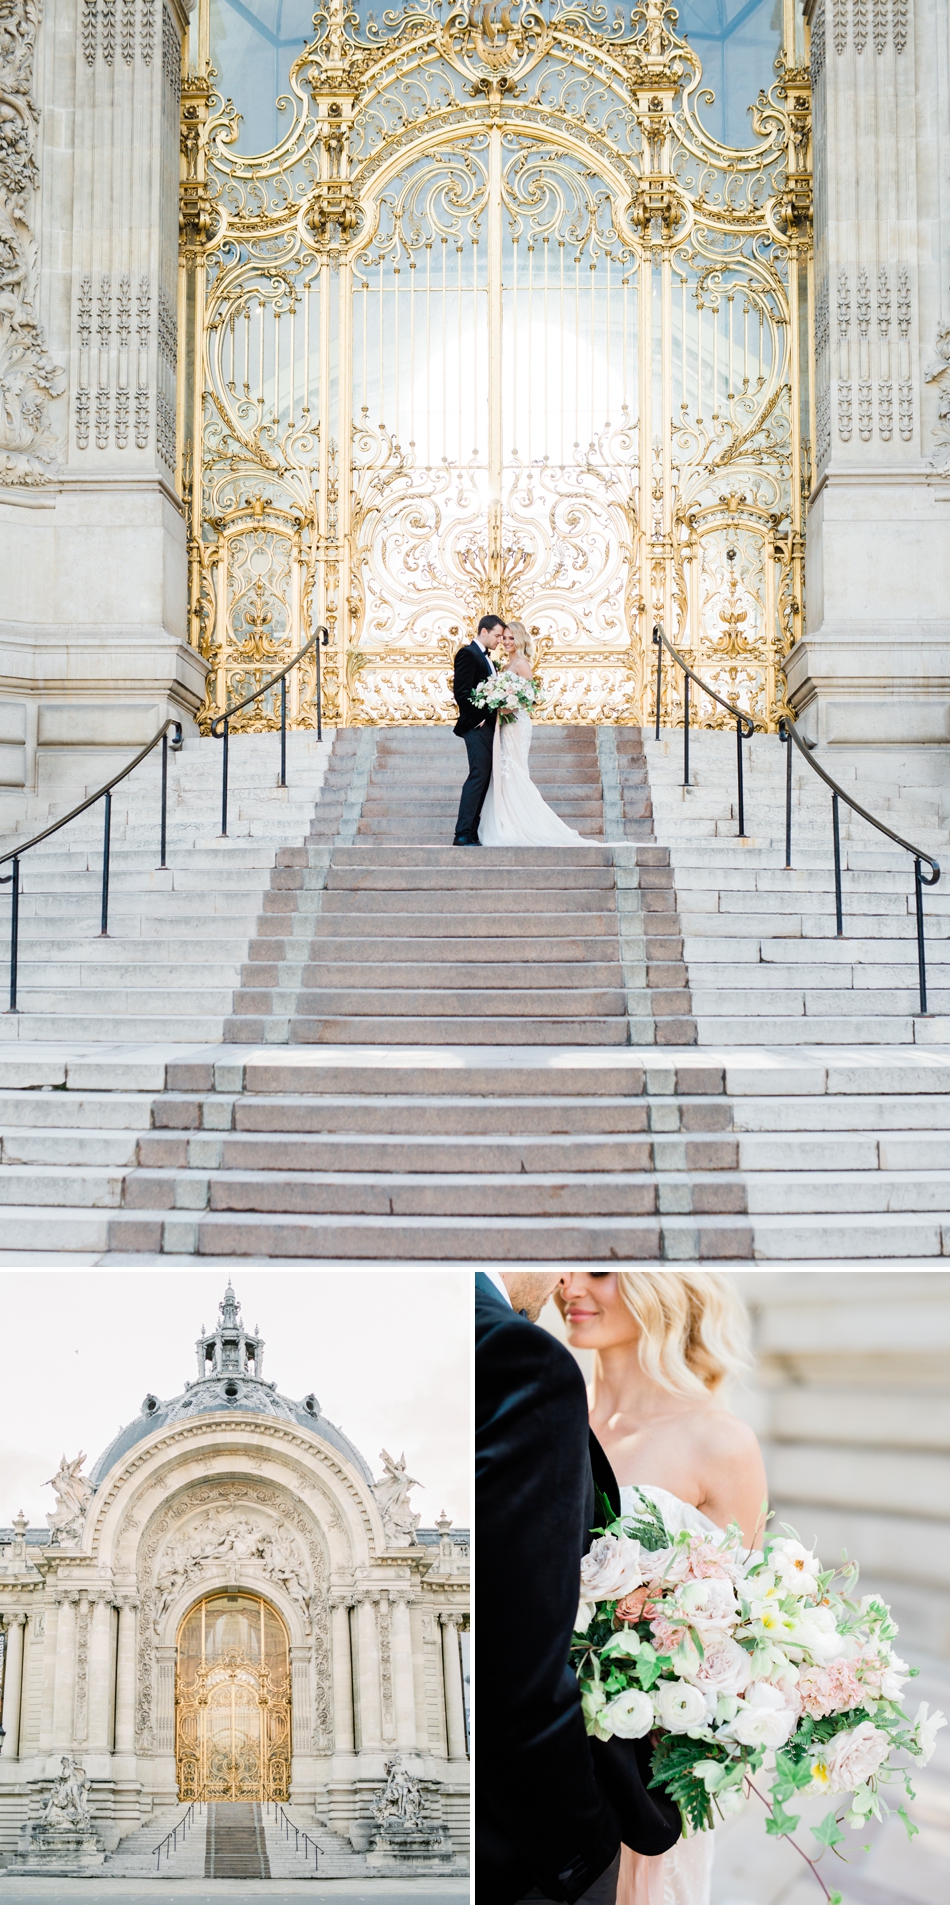 Photoshoot of bride and groom in front of Petit Palais in Paris